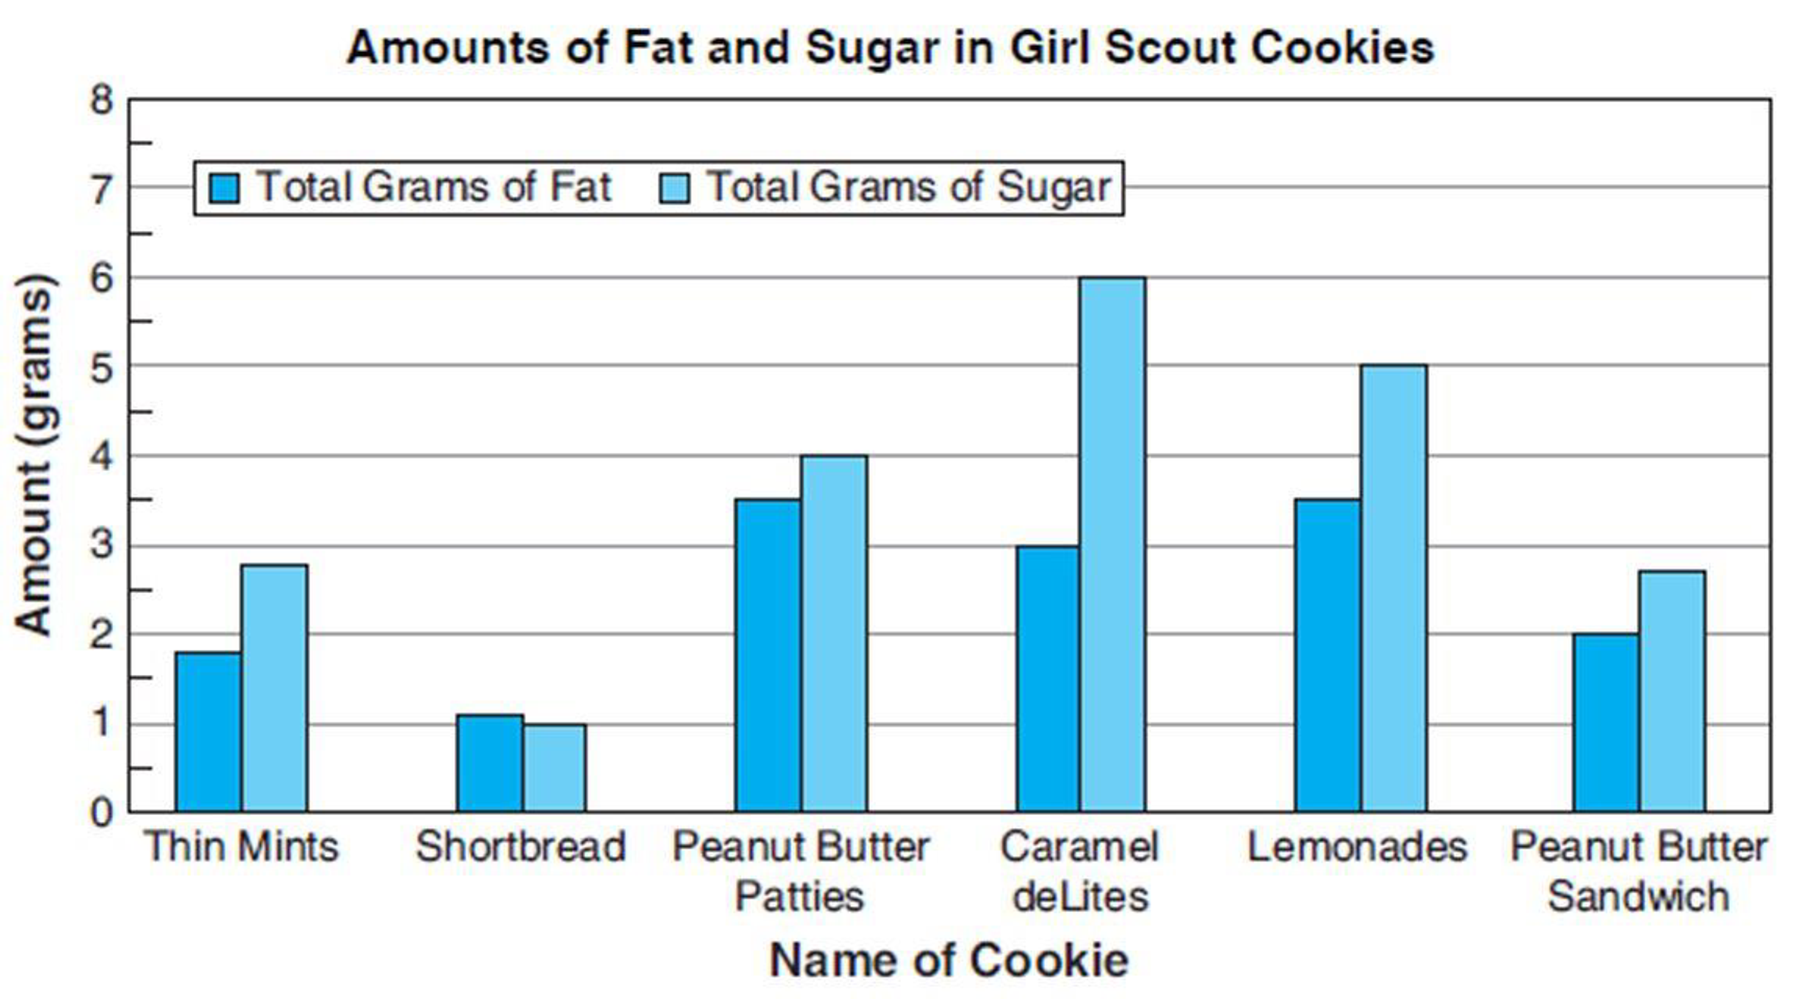 Chapter 12, Problem 10APS, How many more grams of fat are in two Caramel deLites than in two Shortbread cookies? 